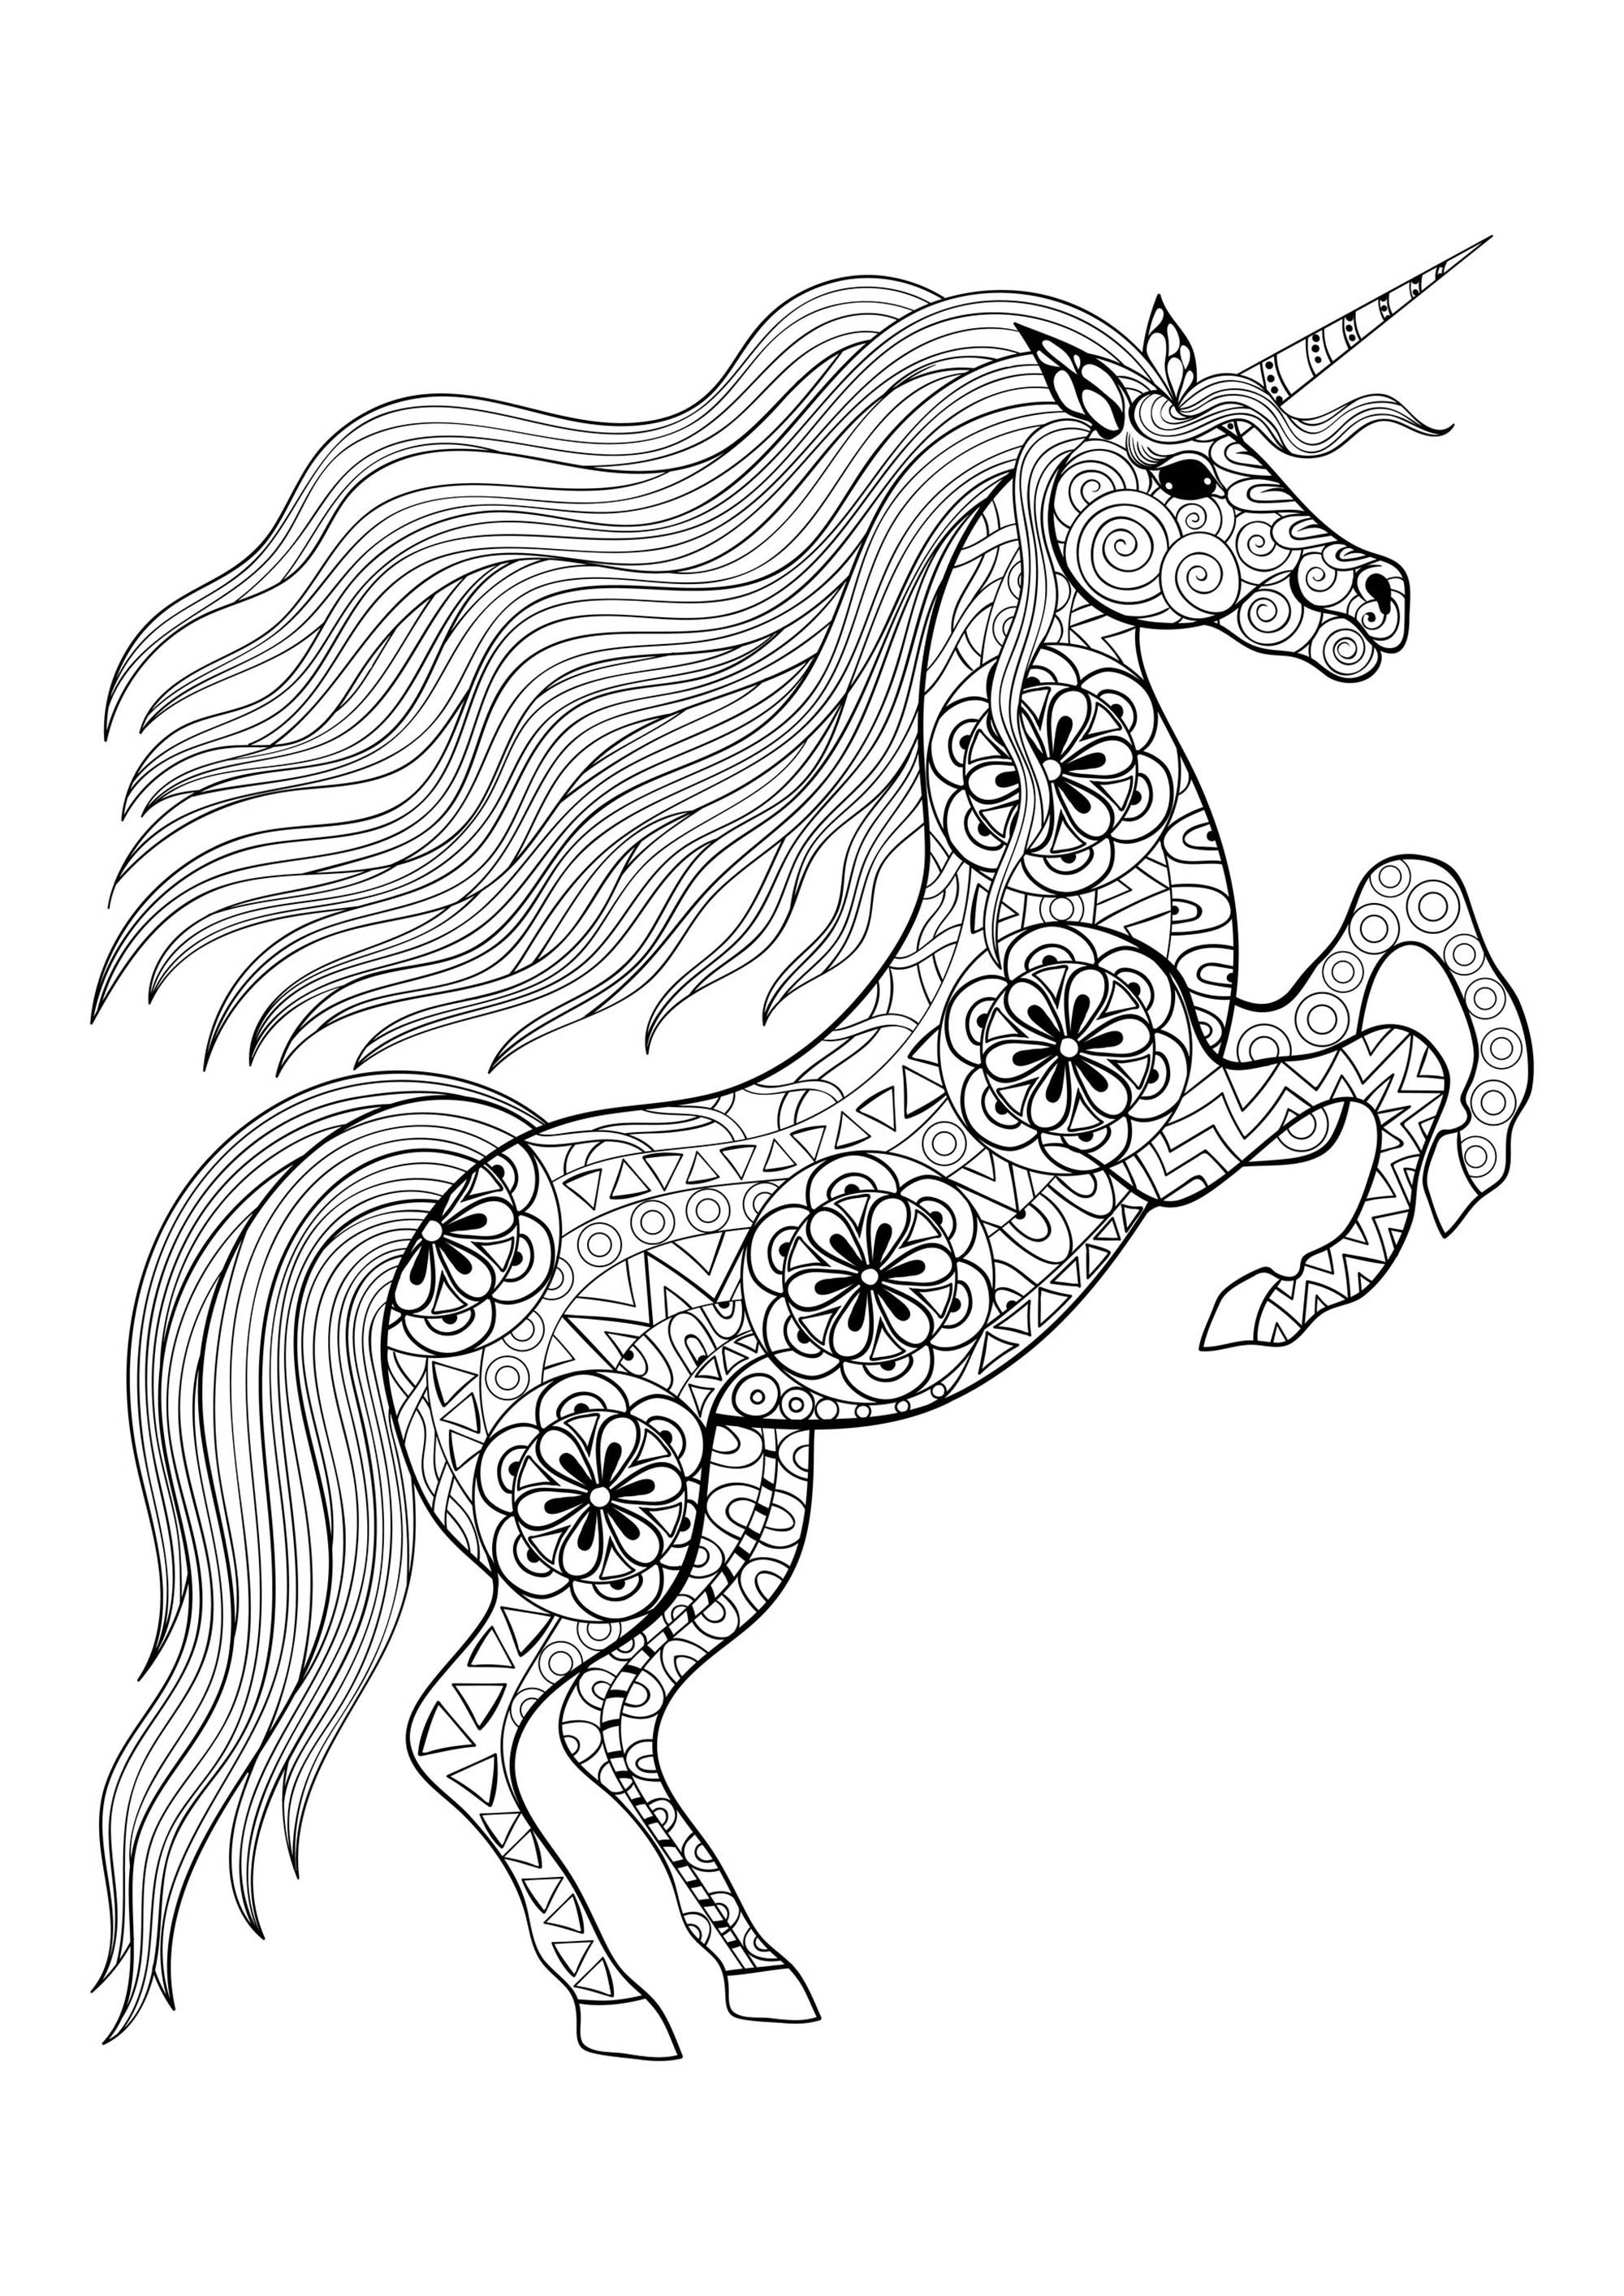 unicorns to color for children unicorns kids coloring pages